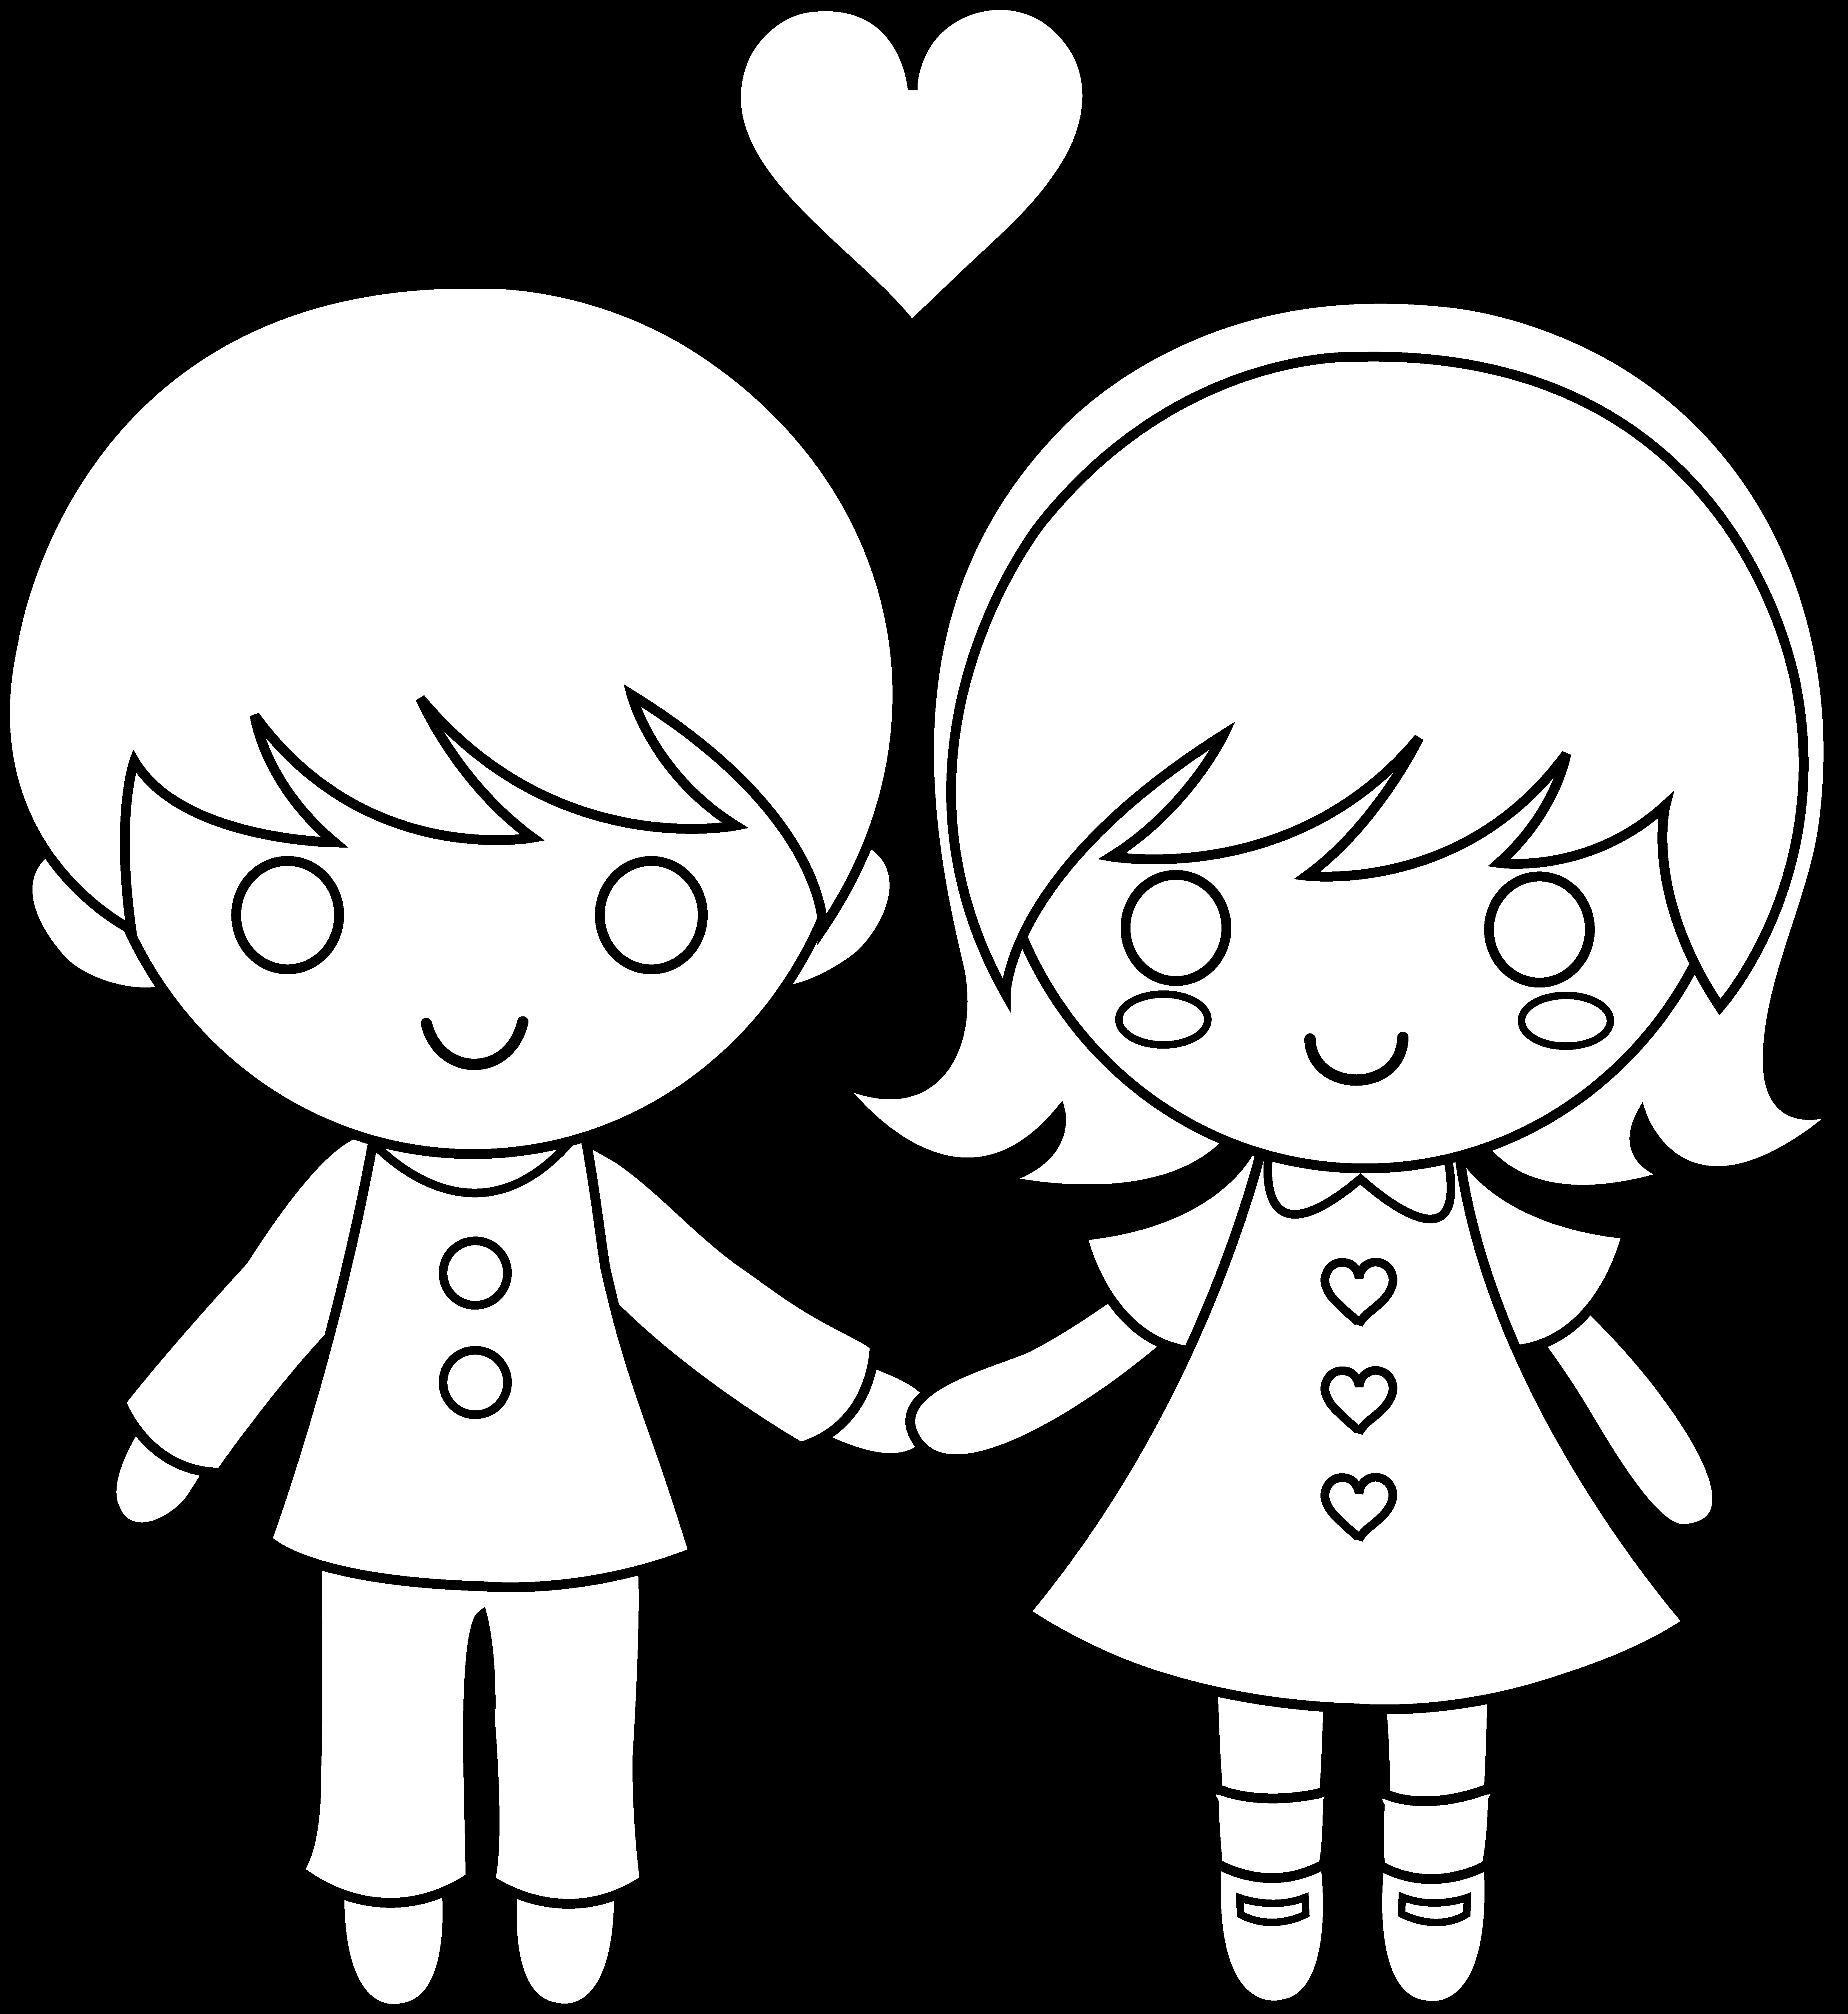 Girl Cartoon Coloring Pages
 Cute Little Girls Coloring Pages Coloring Home